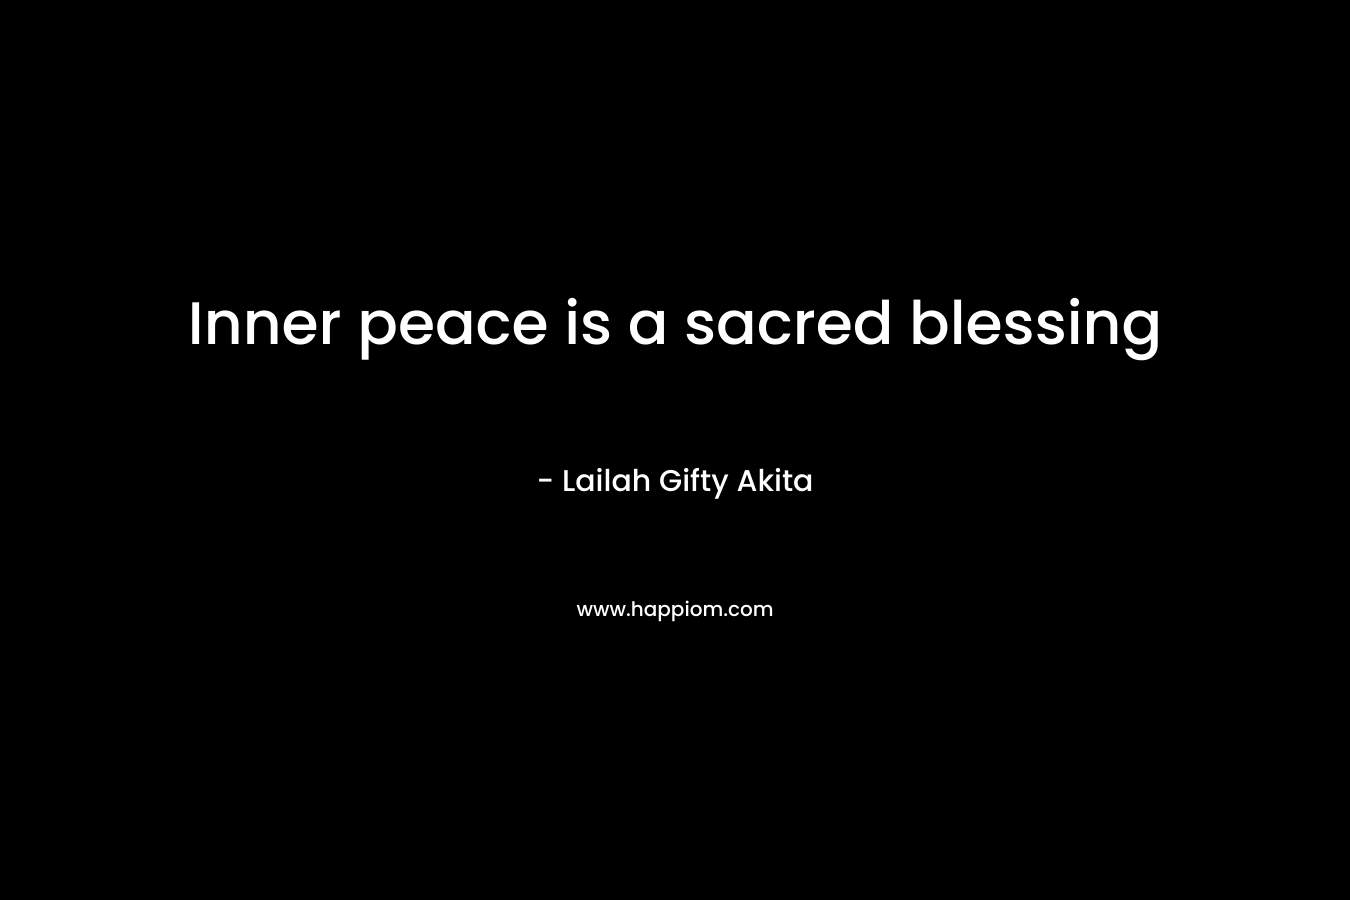 Inner peace is a sacred blessing